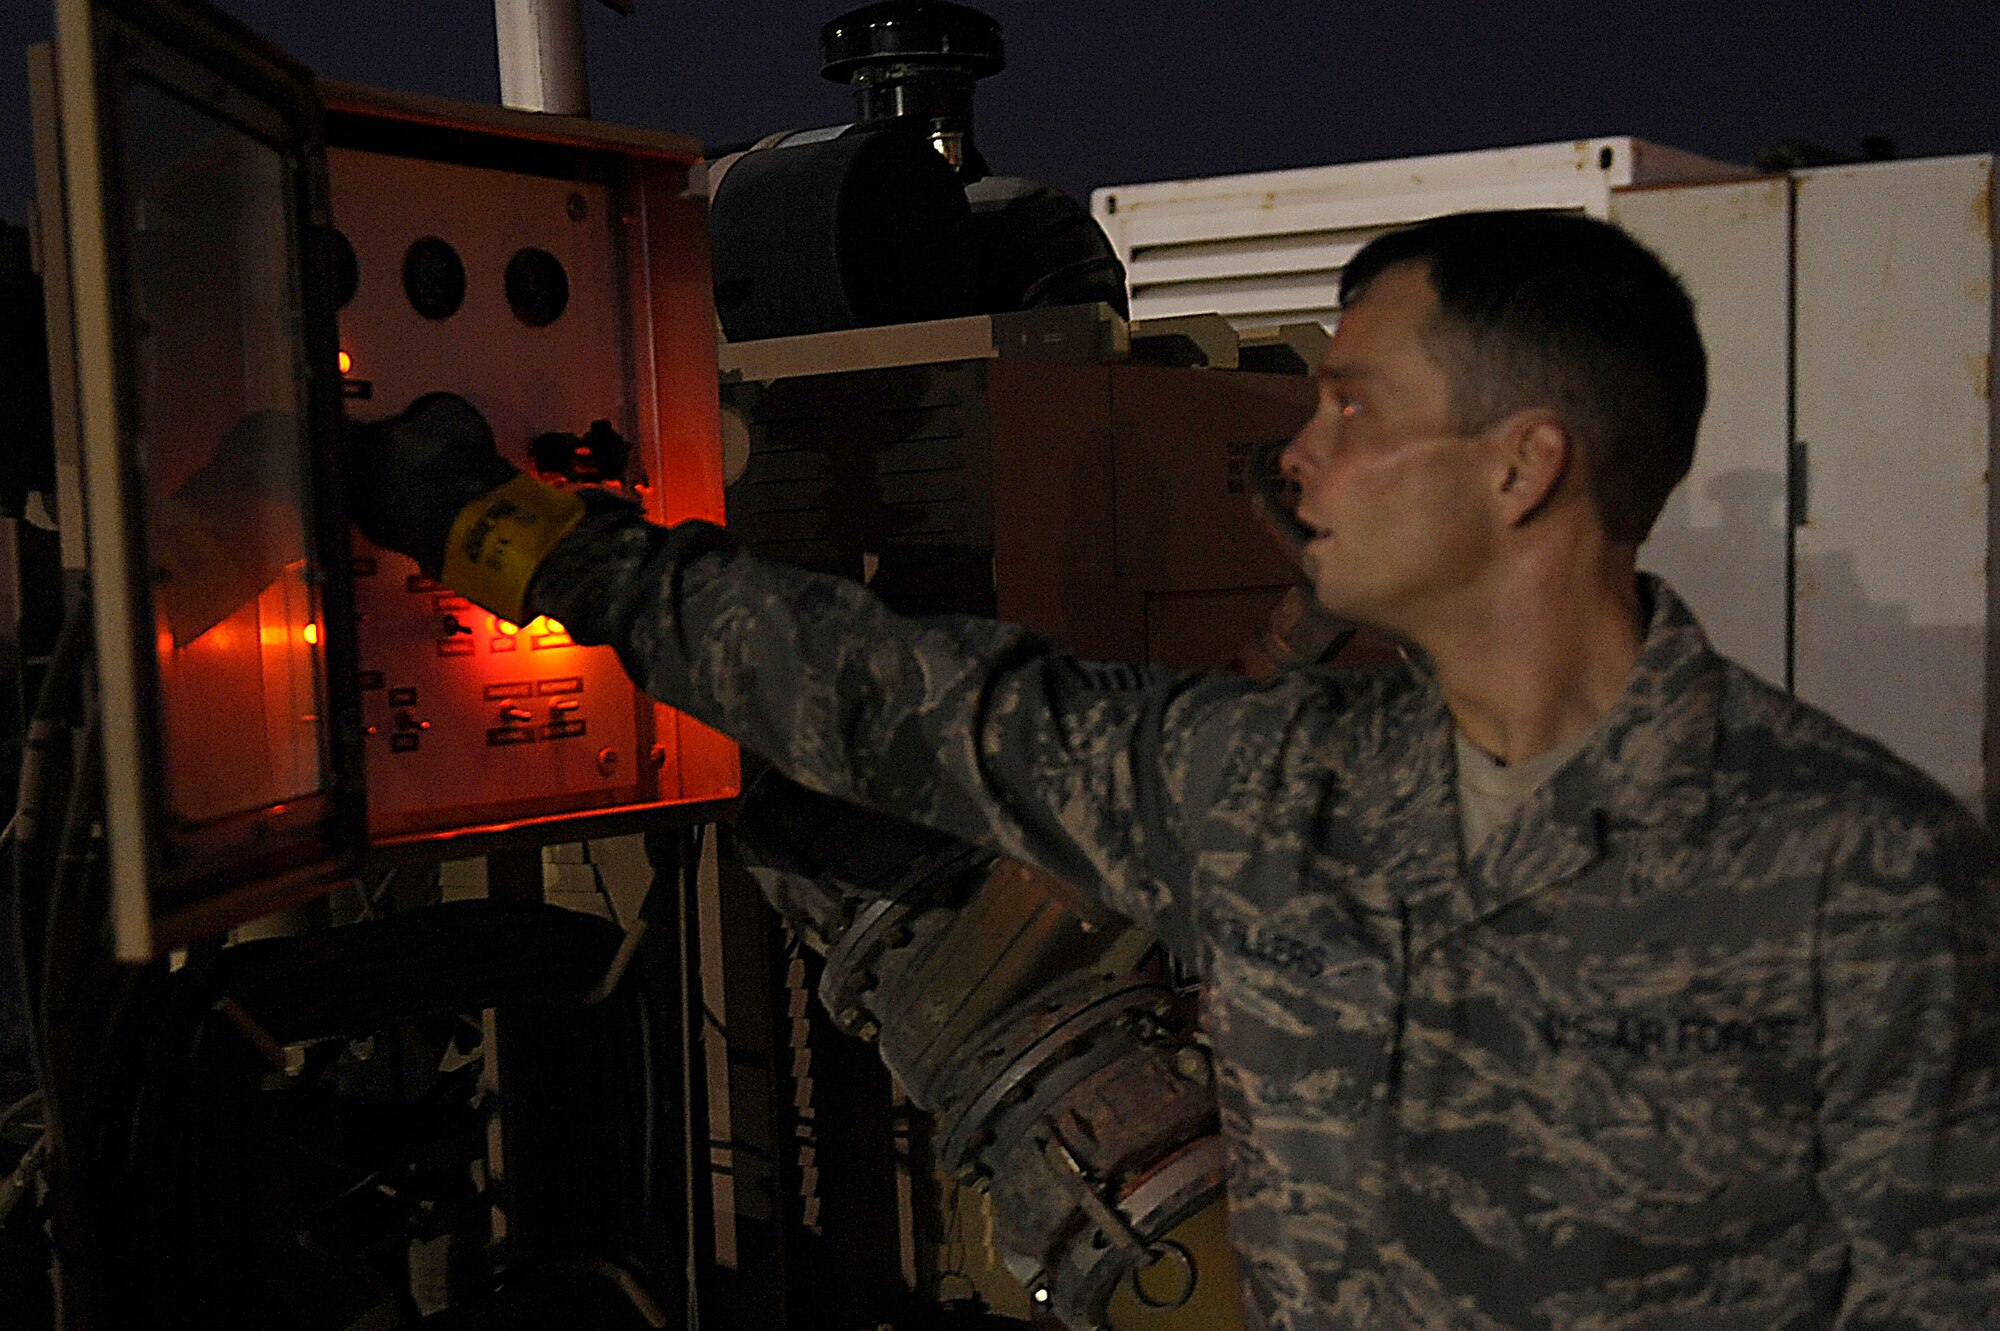 Staff Sgt. James Fillers, 380th Expeditionary Logistics Readiness Squadron, fuels flight, shuts down the R-19 offloading pump after an operations check, April 4 at an undisclosed location in Southwest Asia. The fuels flight receives fuel trucks 20 hours a day to keep up with the 380th Air Expeditionary Wing's mission. Sergeant Fillers is deployed from Eglin AFB, Fla. and hails from Johnson City, Tenn. (U.S. Air Force photo by Senior Airman Brian J. Ellis) (Released)